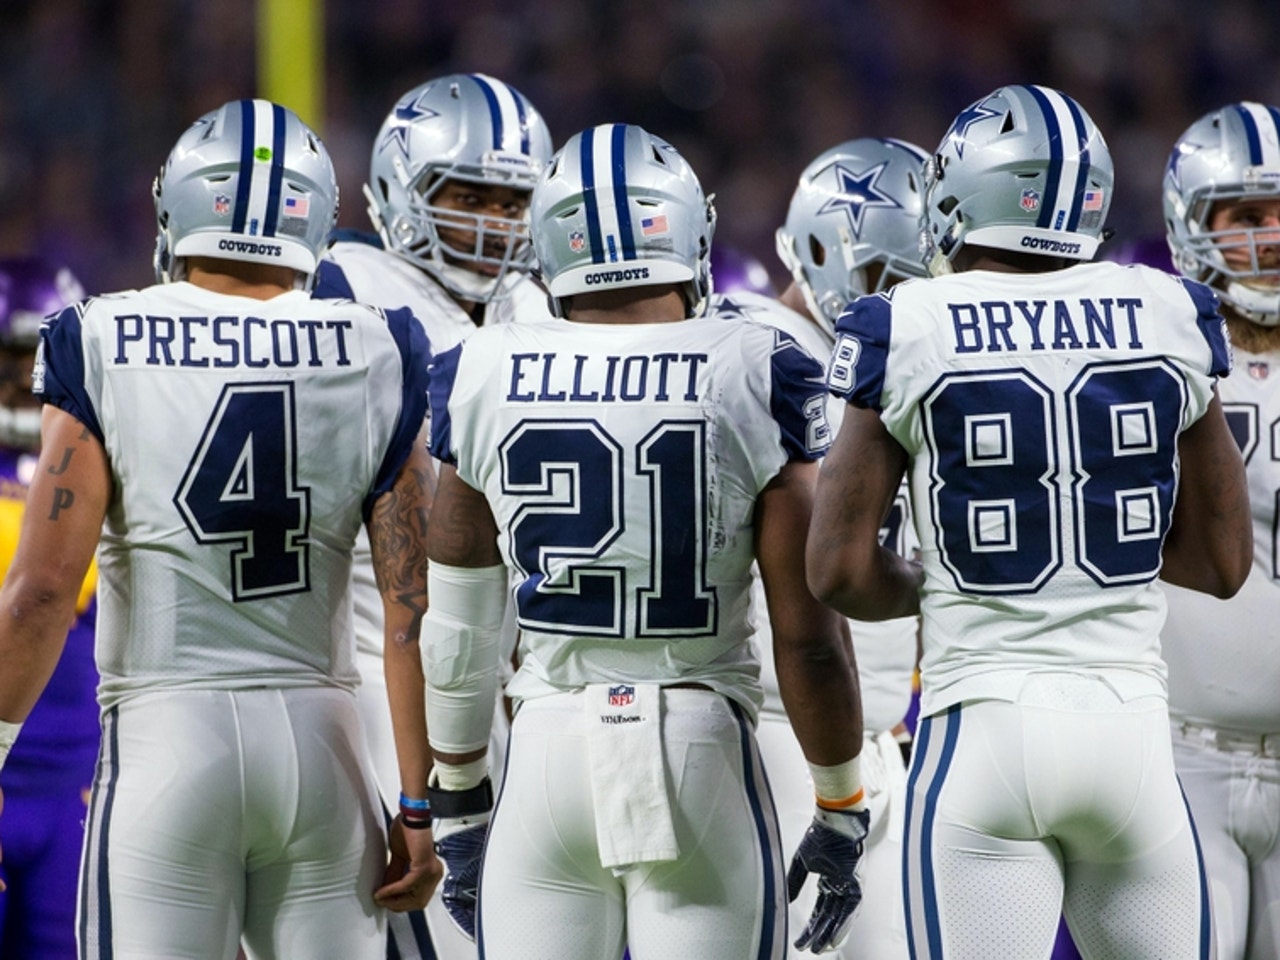 NFL Fans React To Cowboys Dominating The Giants - The Spun: What's